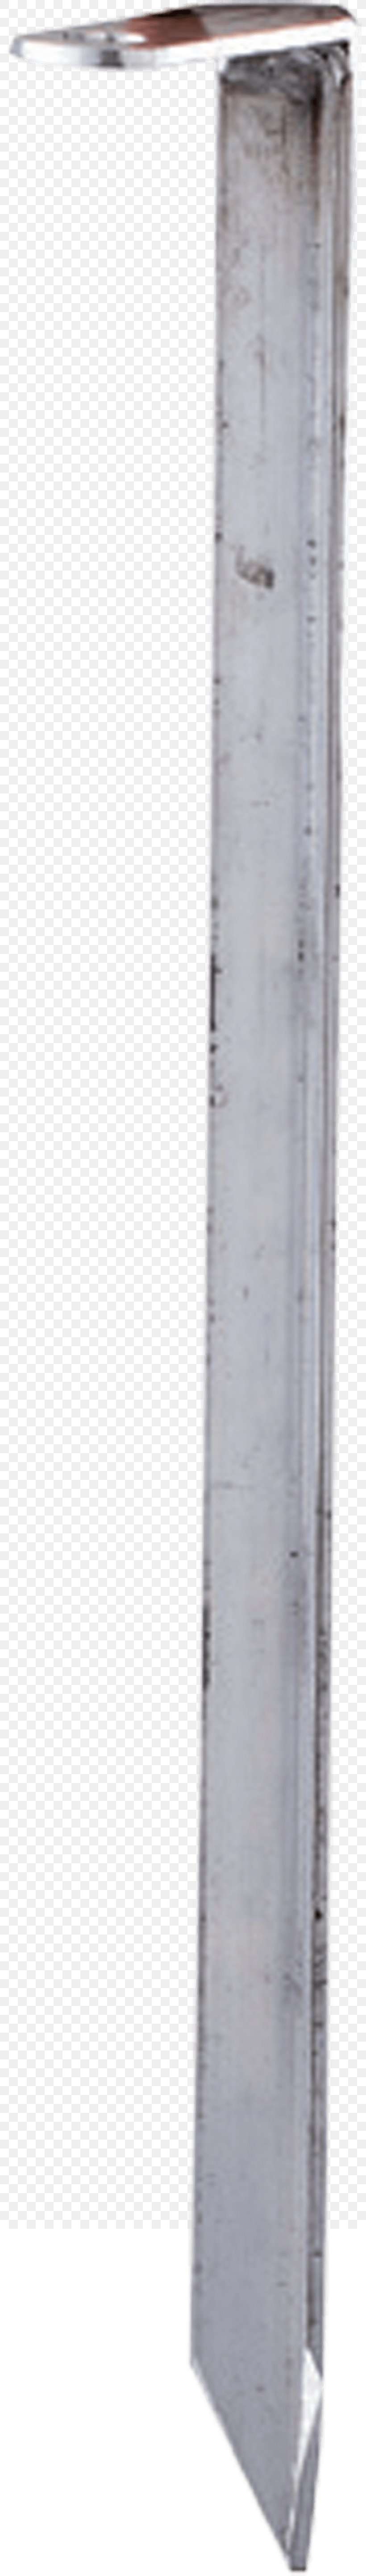 Cylinder Angle, PNG, 800x5779px, Cylinder Download Free